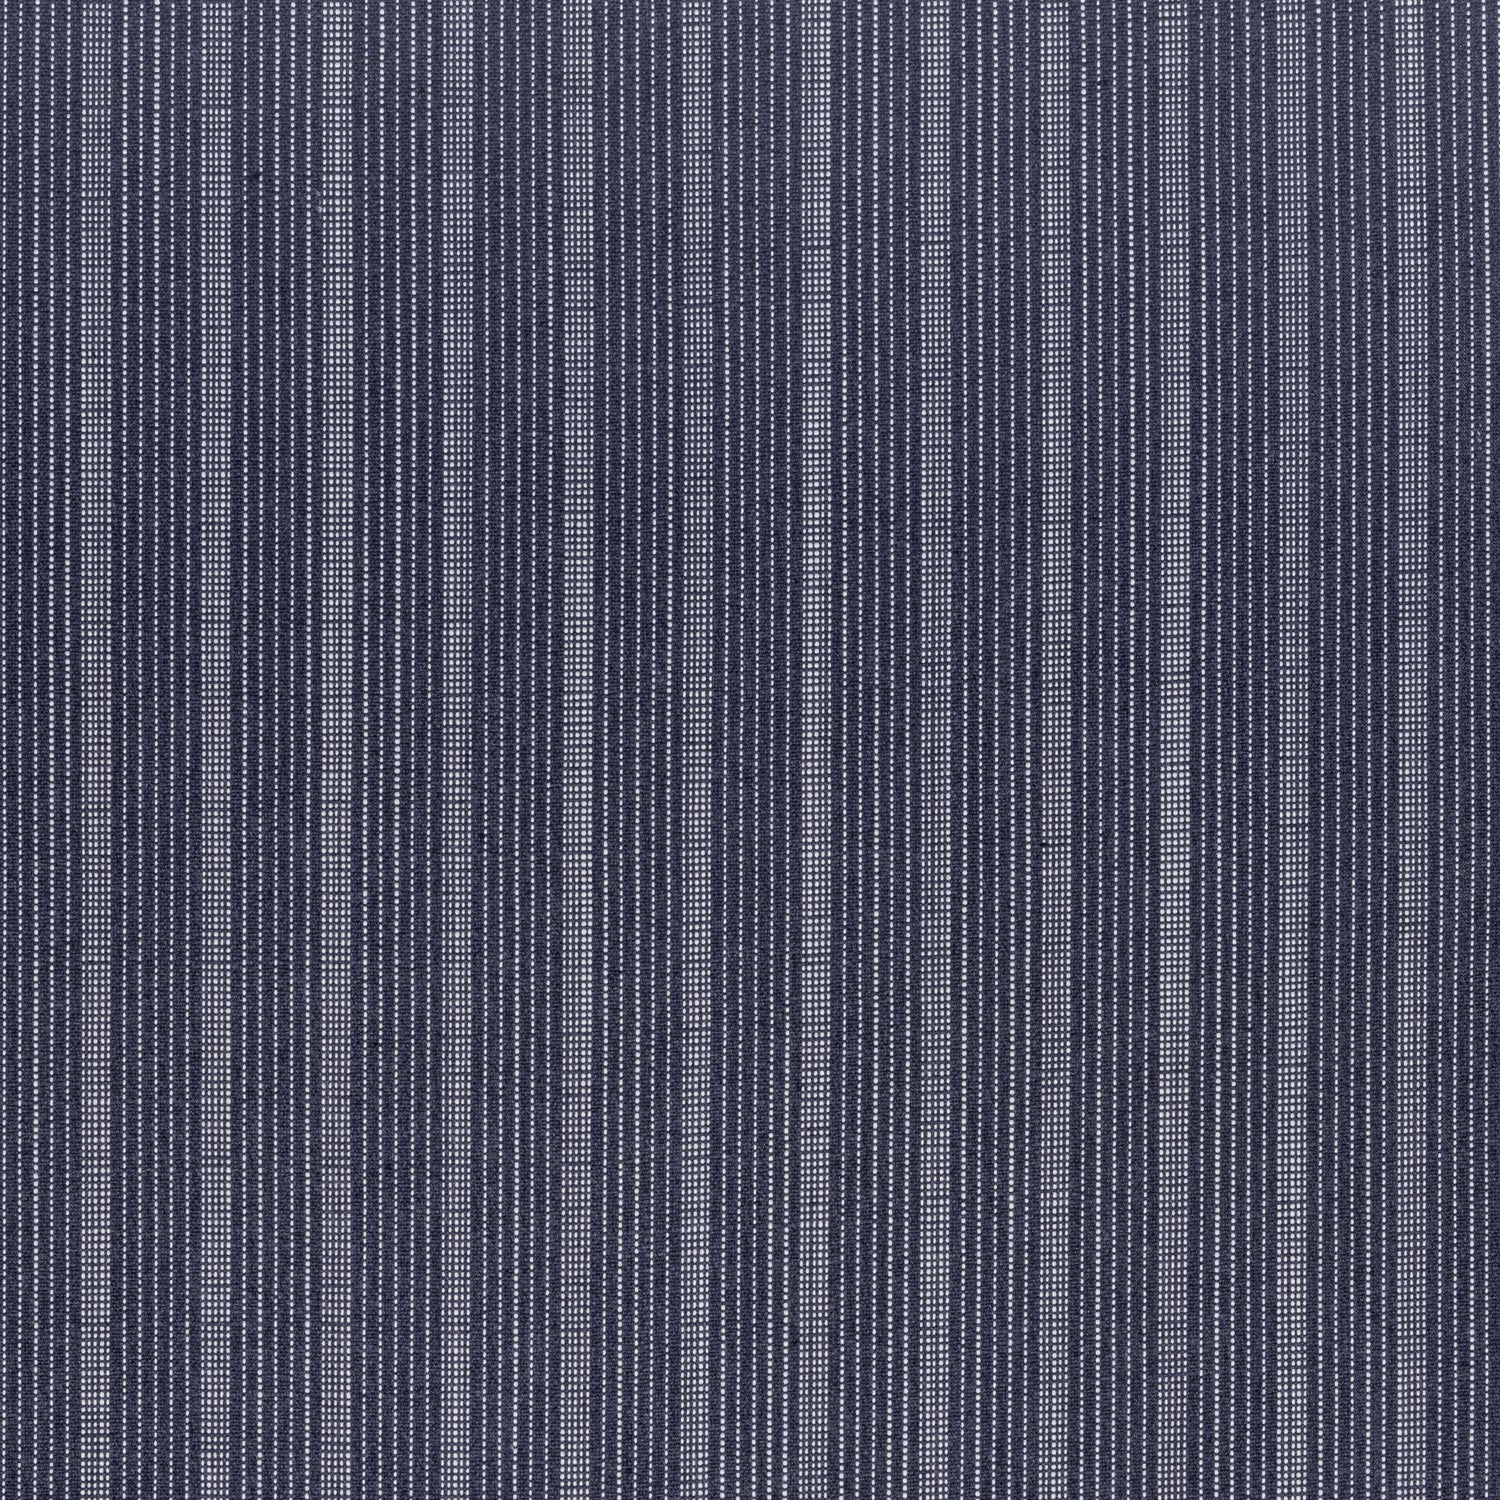 Ebro Stripe fabric in navy color - pattern number W8511 - by Thibaut in the Villa collection